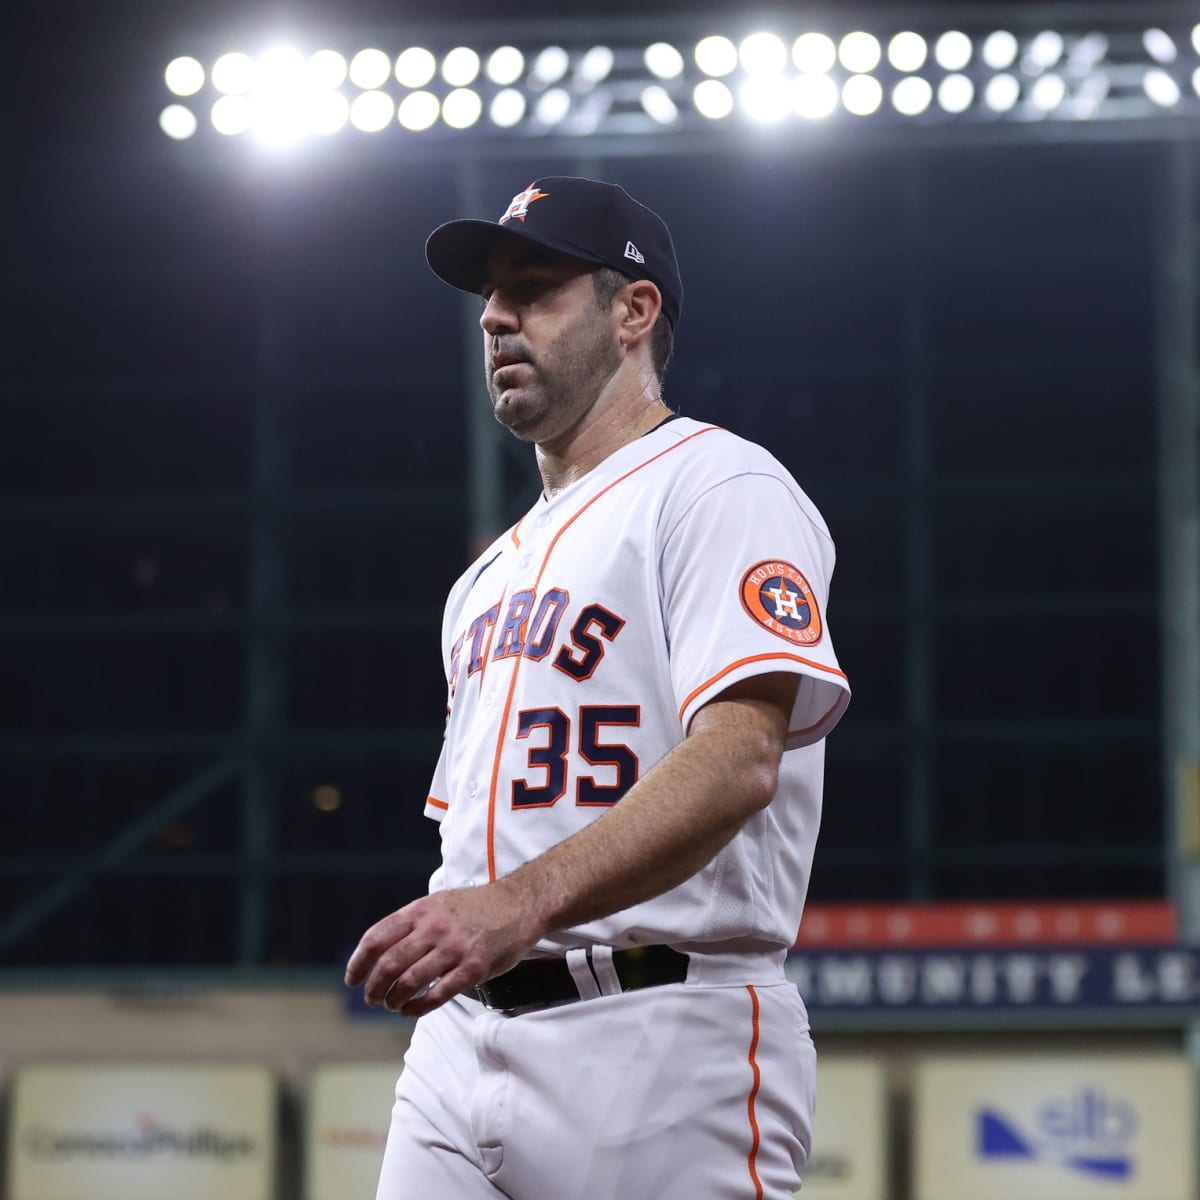 A Cy Young campaign at 39 years old? Justin Verlander has always